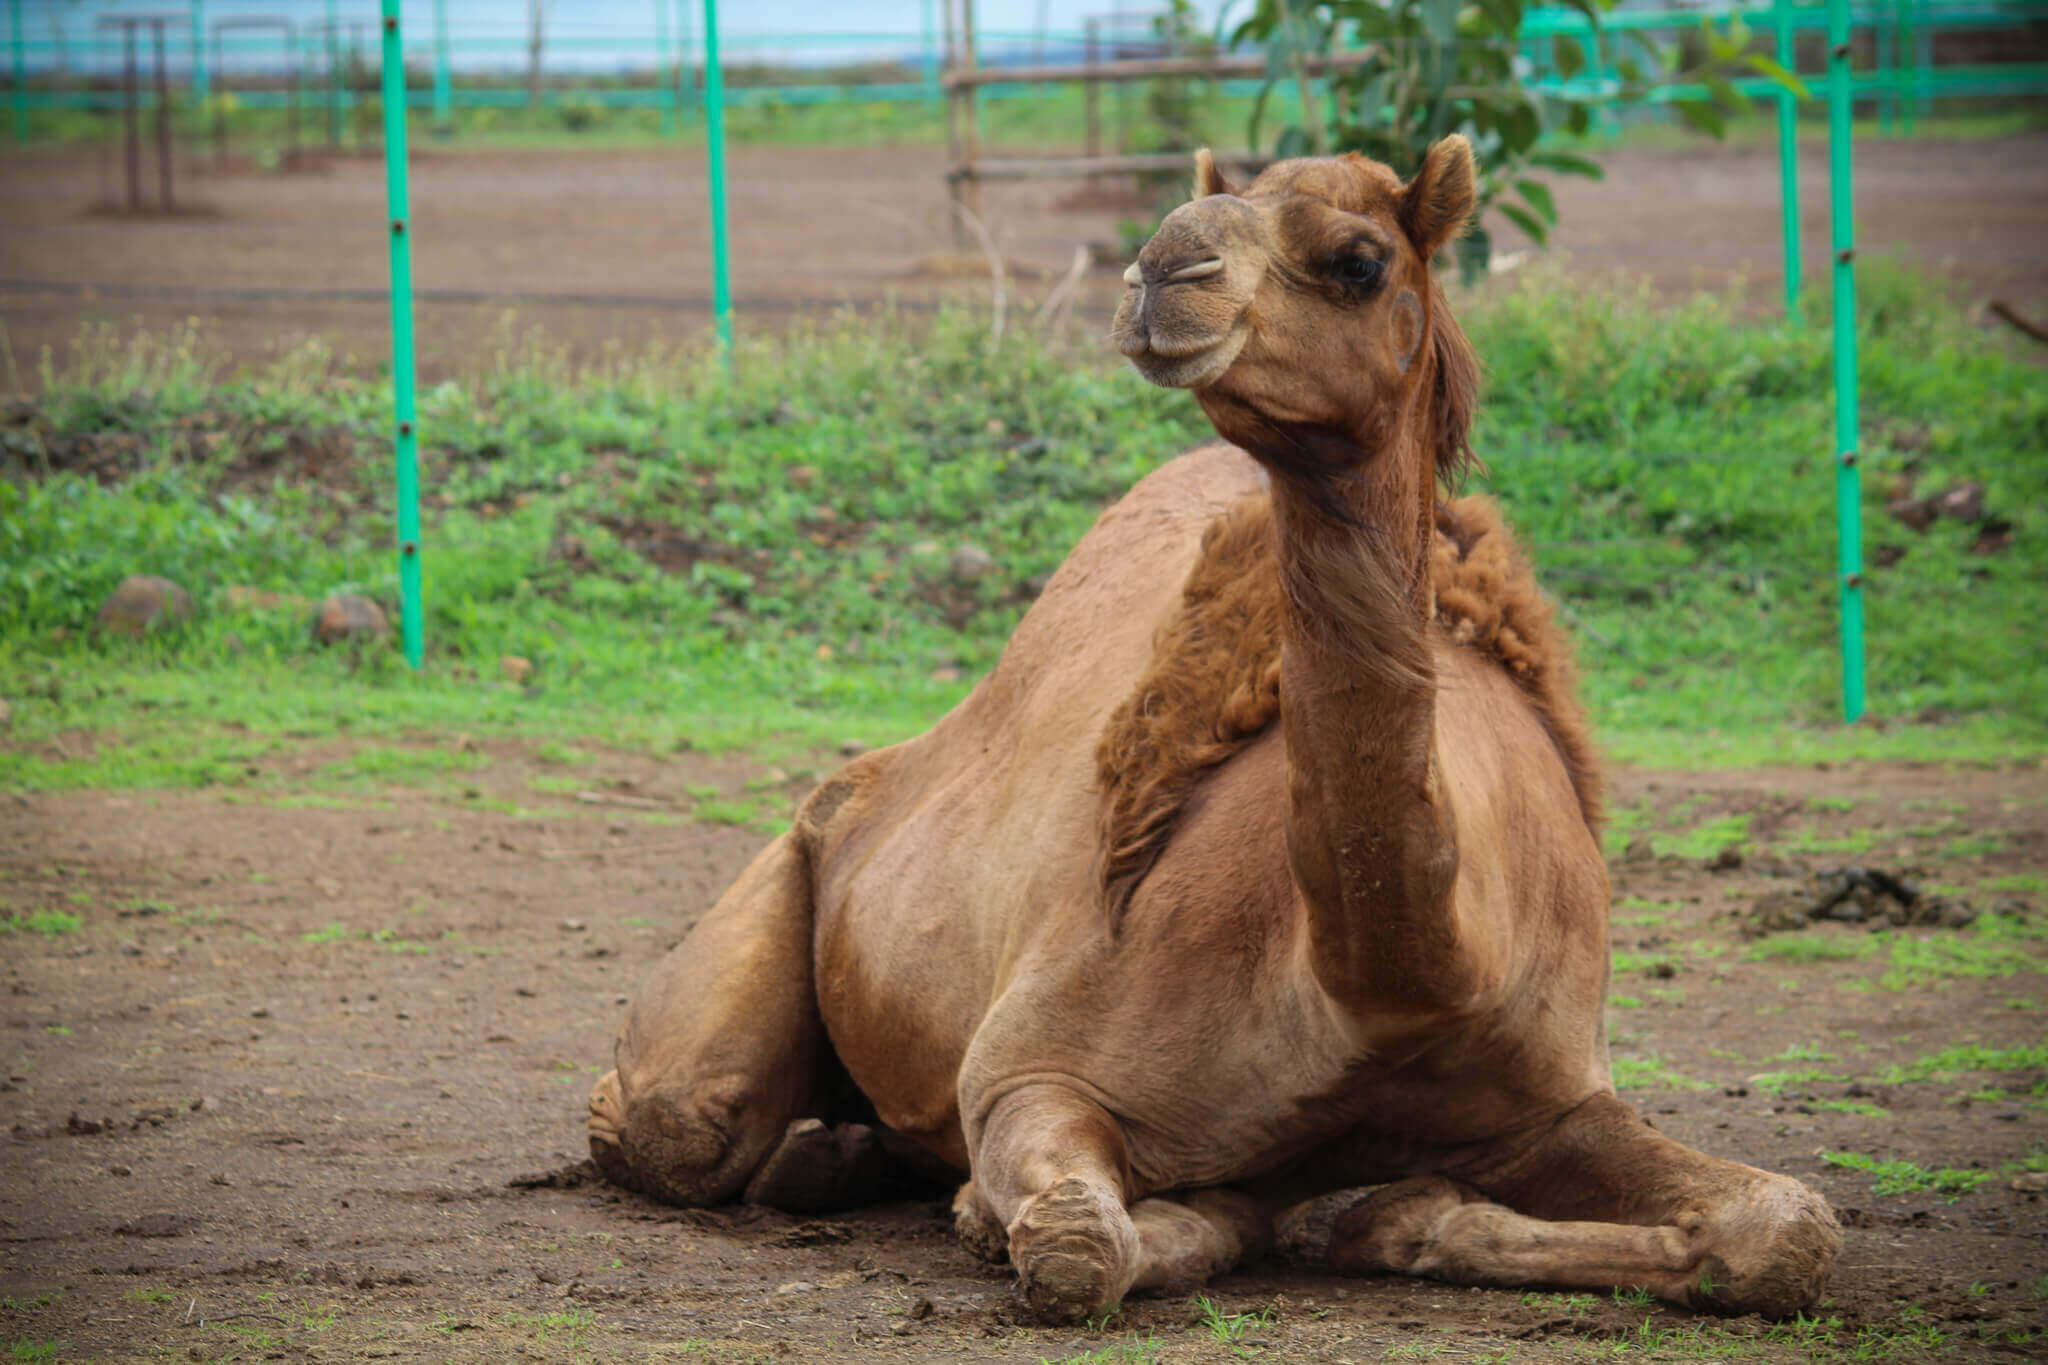 Tracy, a light brown camel with a big tuft of hair on her, sits on the ground at the sanctuary with a smile on her face.